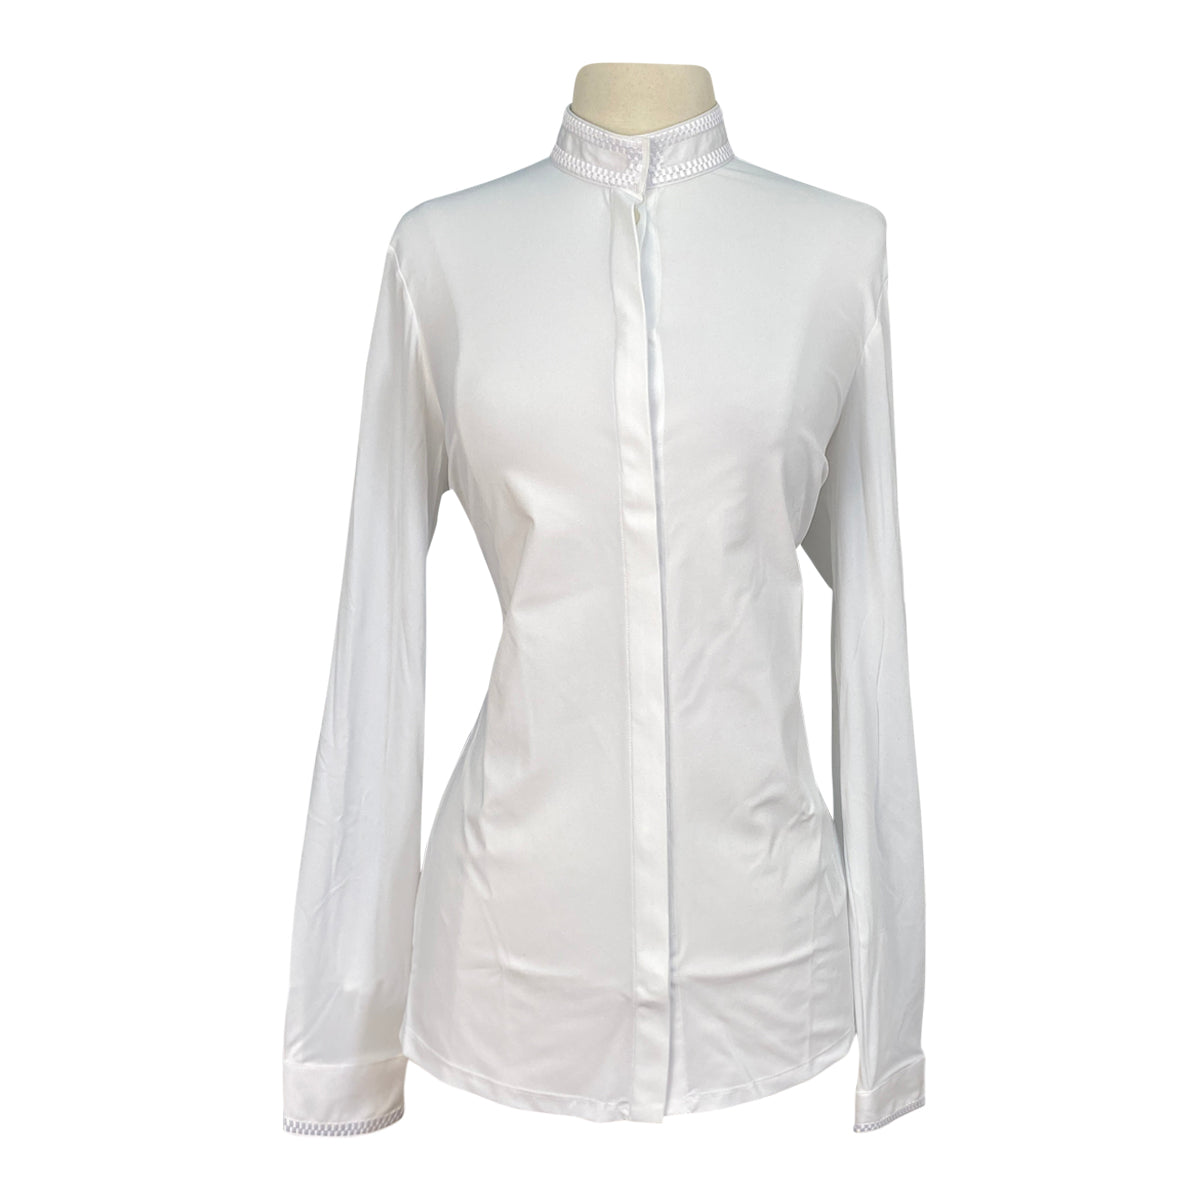 Cavalleria Toscana 'Elegant Embroidery' L/S Jersey Competition Shirt  in White